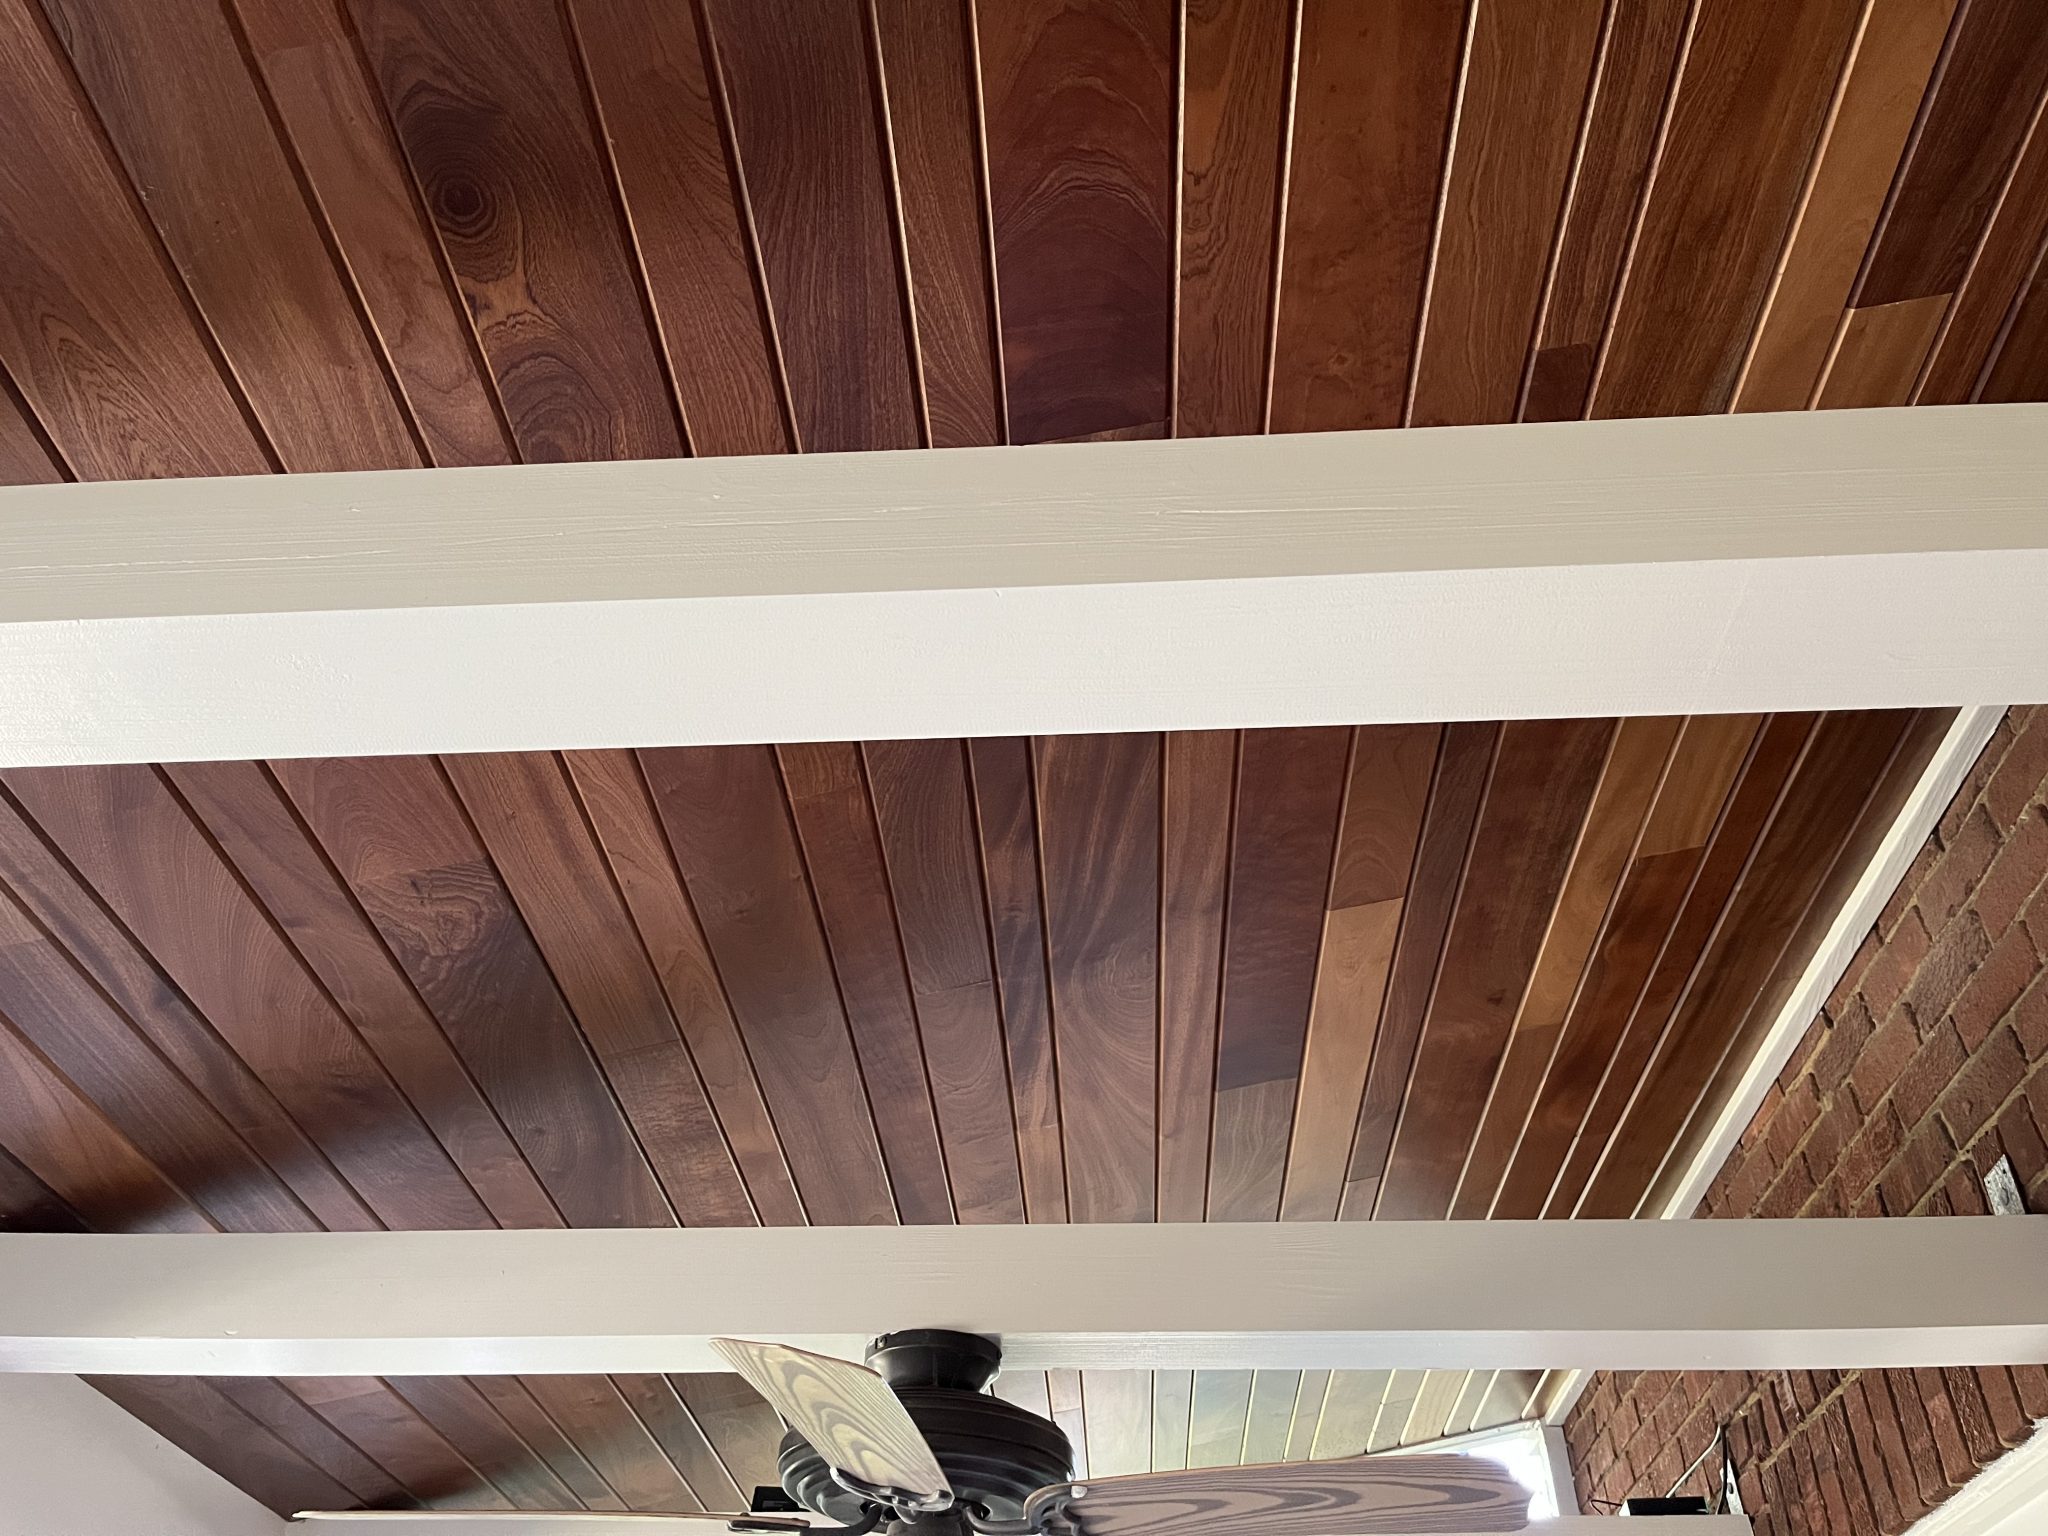 Tongue and groove Sapele porch ceiling